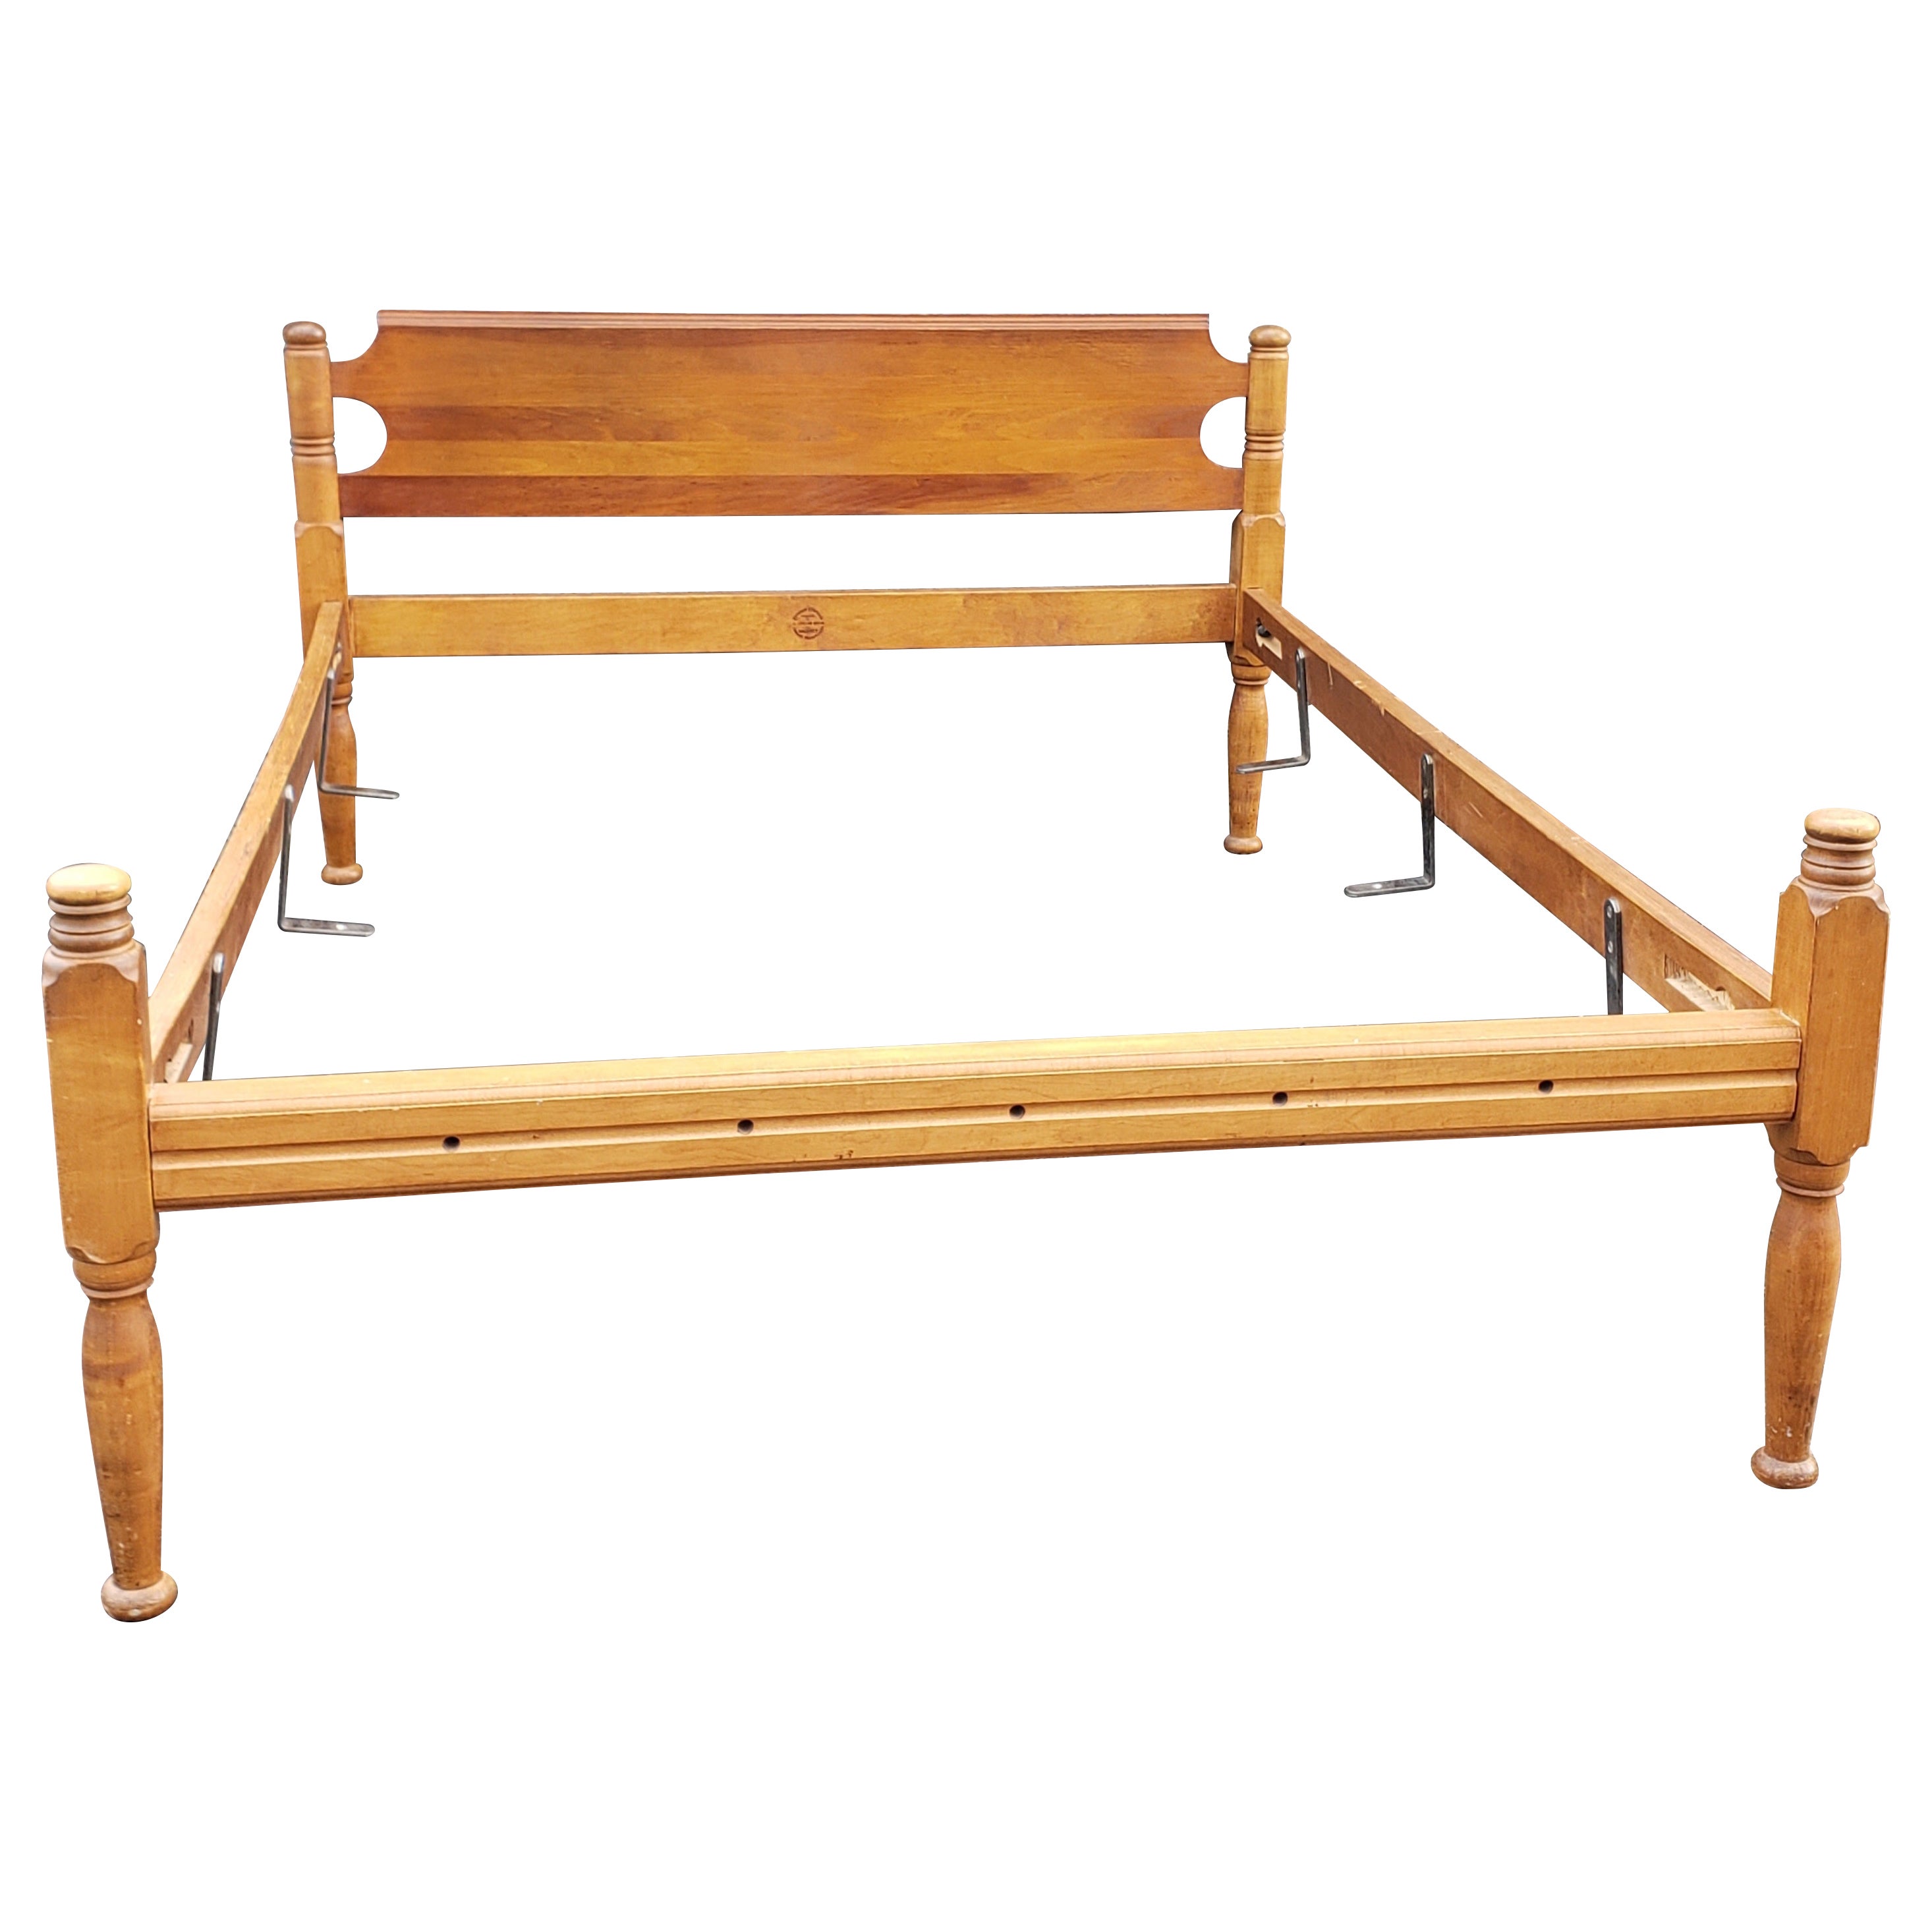 Cohasset Colonials by Hagerty Colonial Style Maple Full Size Bedframe